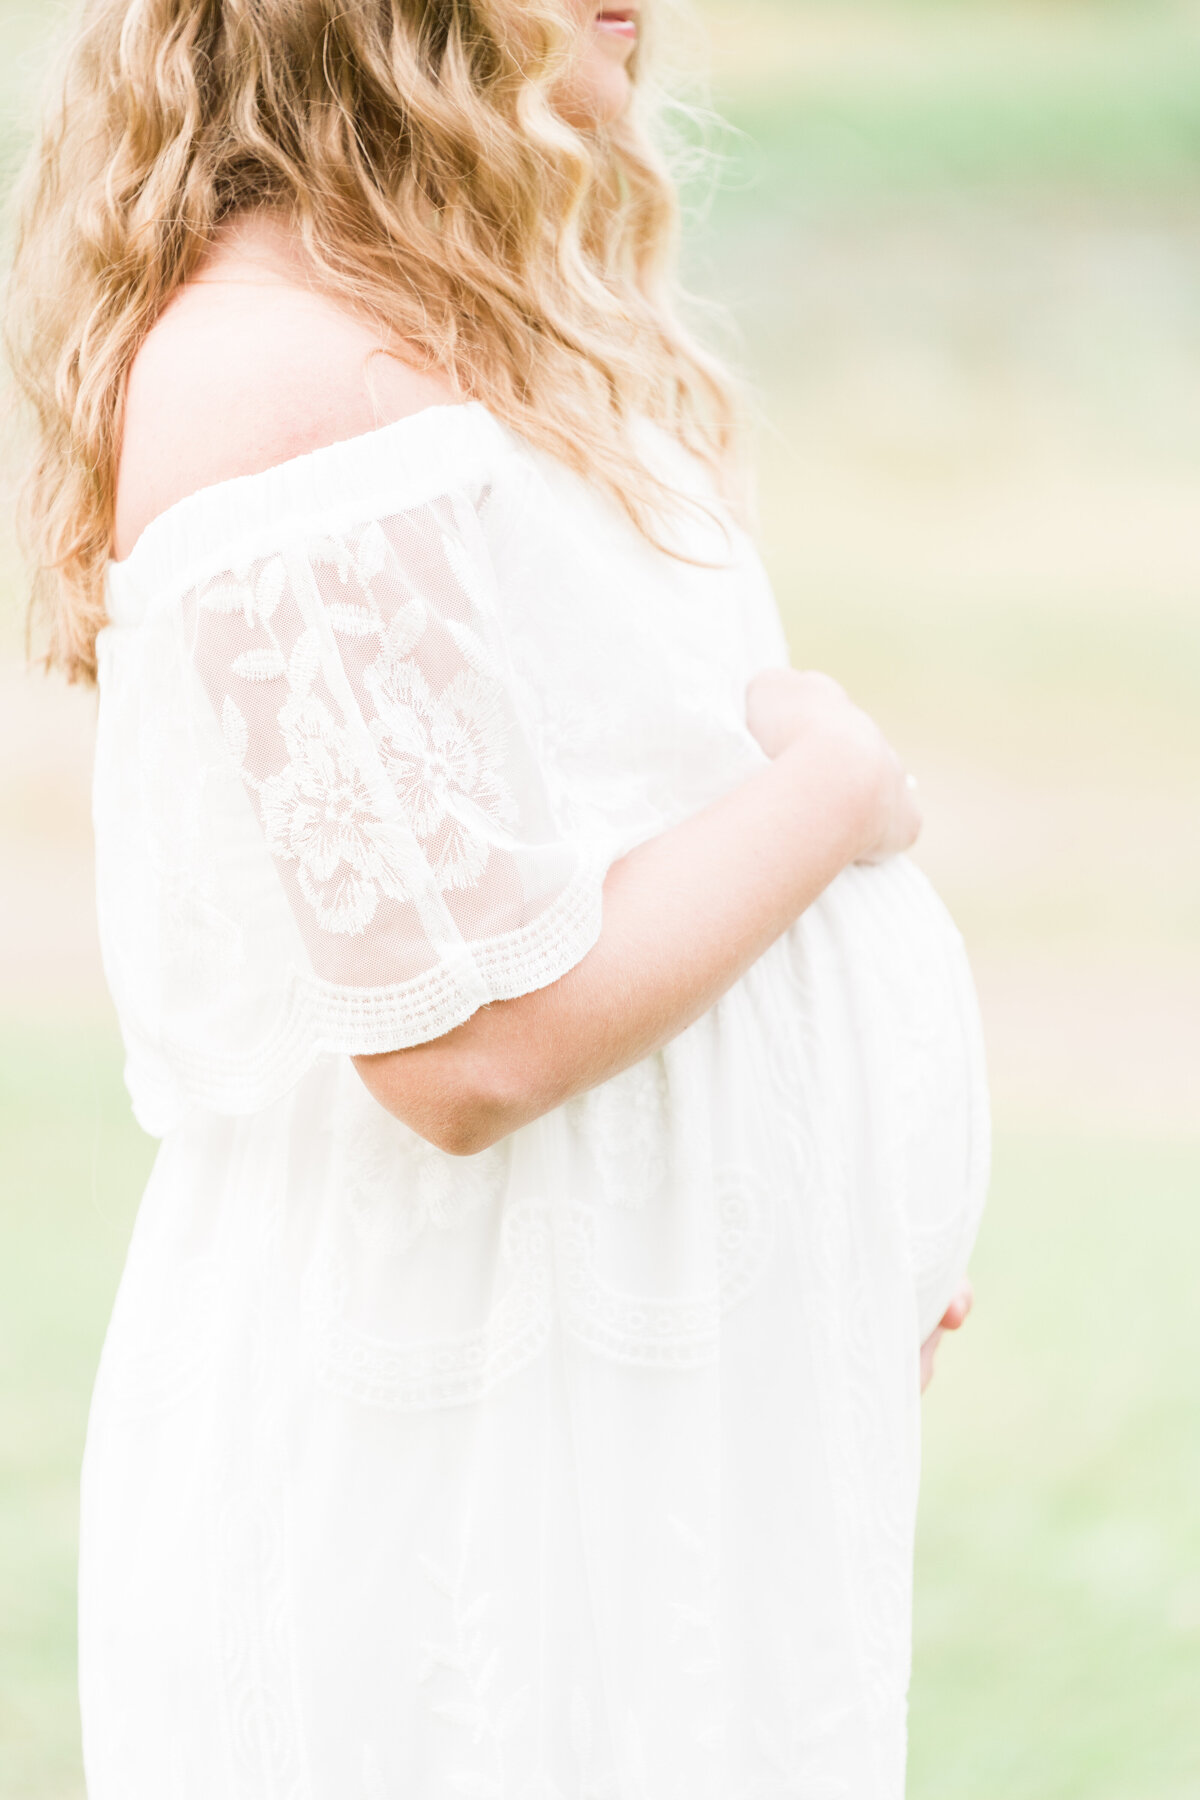 Maternity photoshoot in a park in Alabama